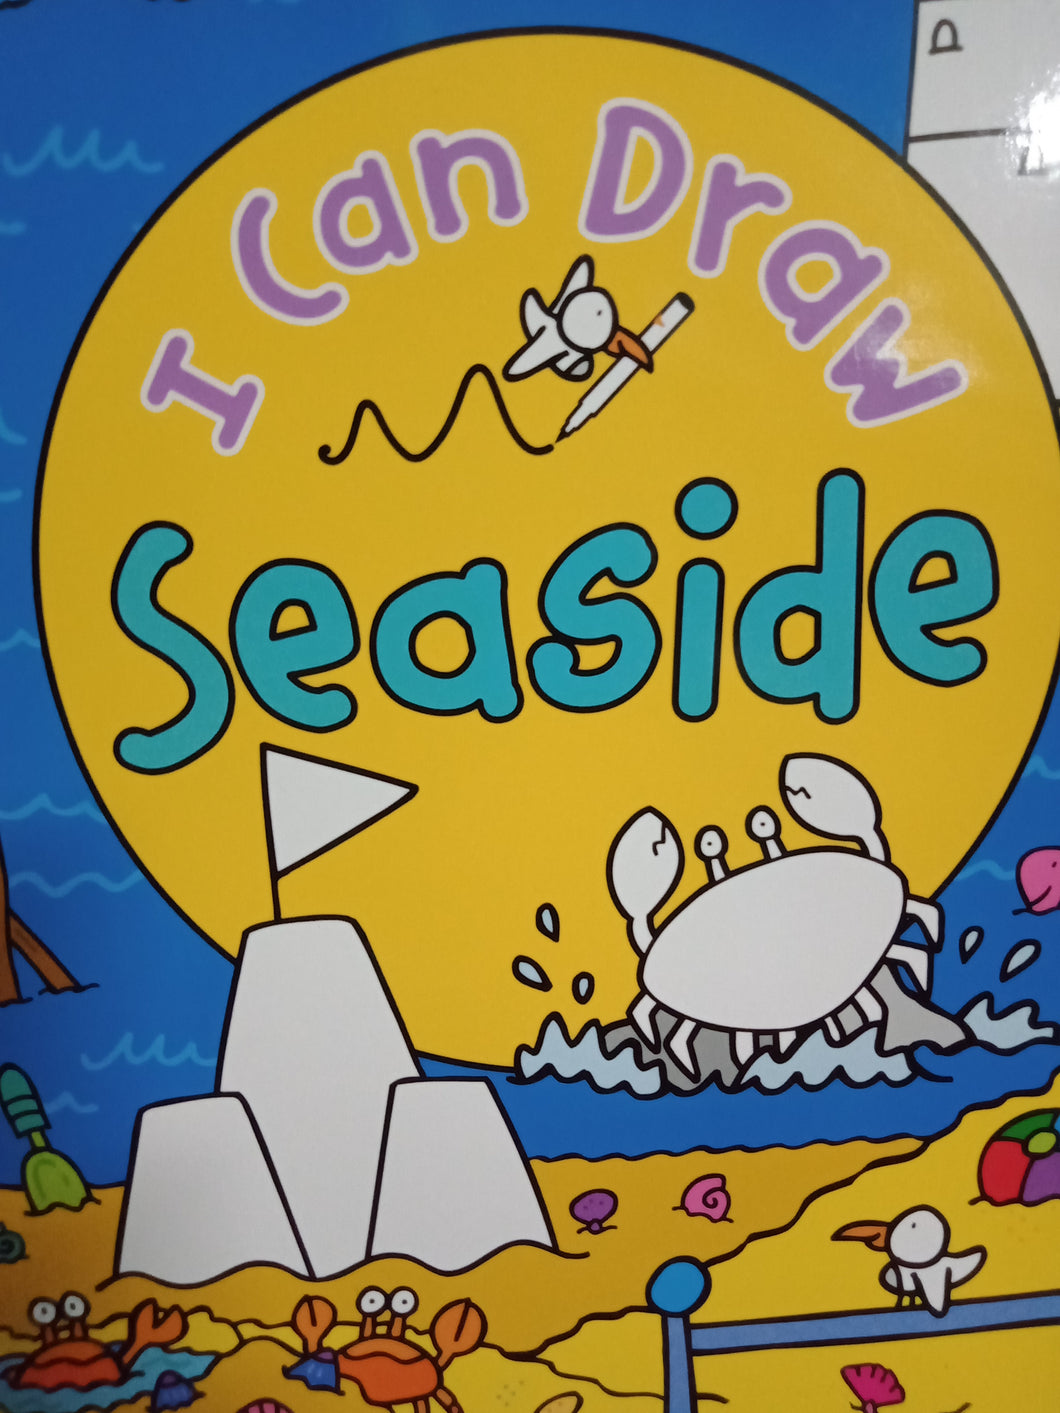 I Can Draw Seaside - Books for Less Online Bookstore